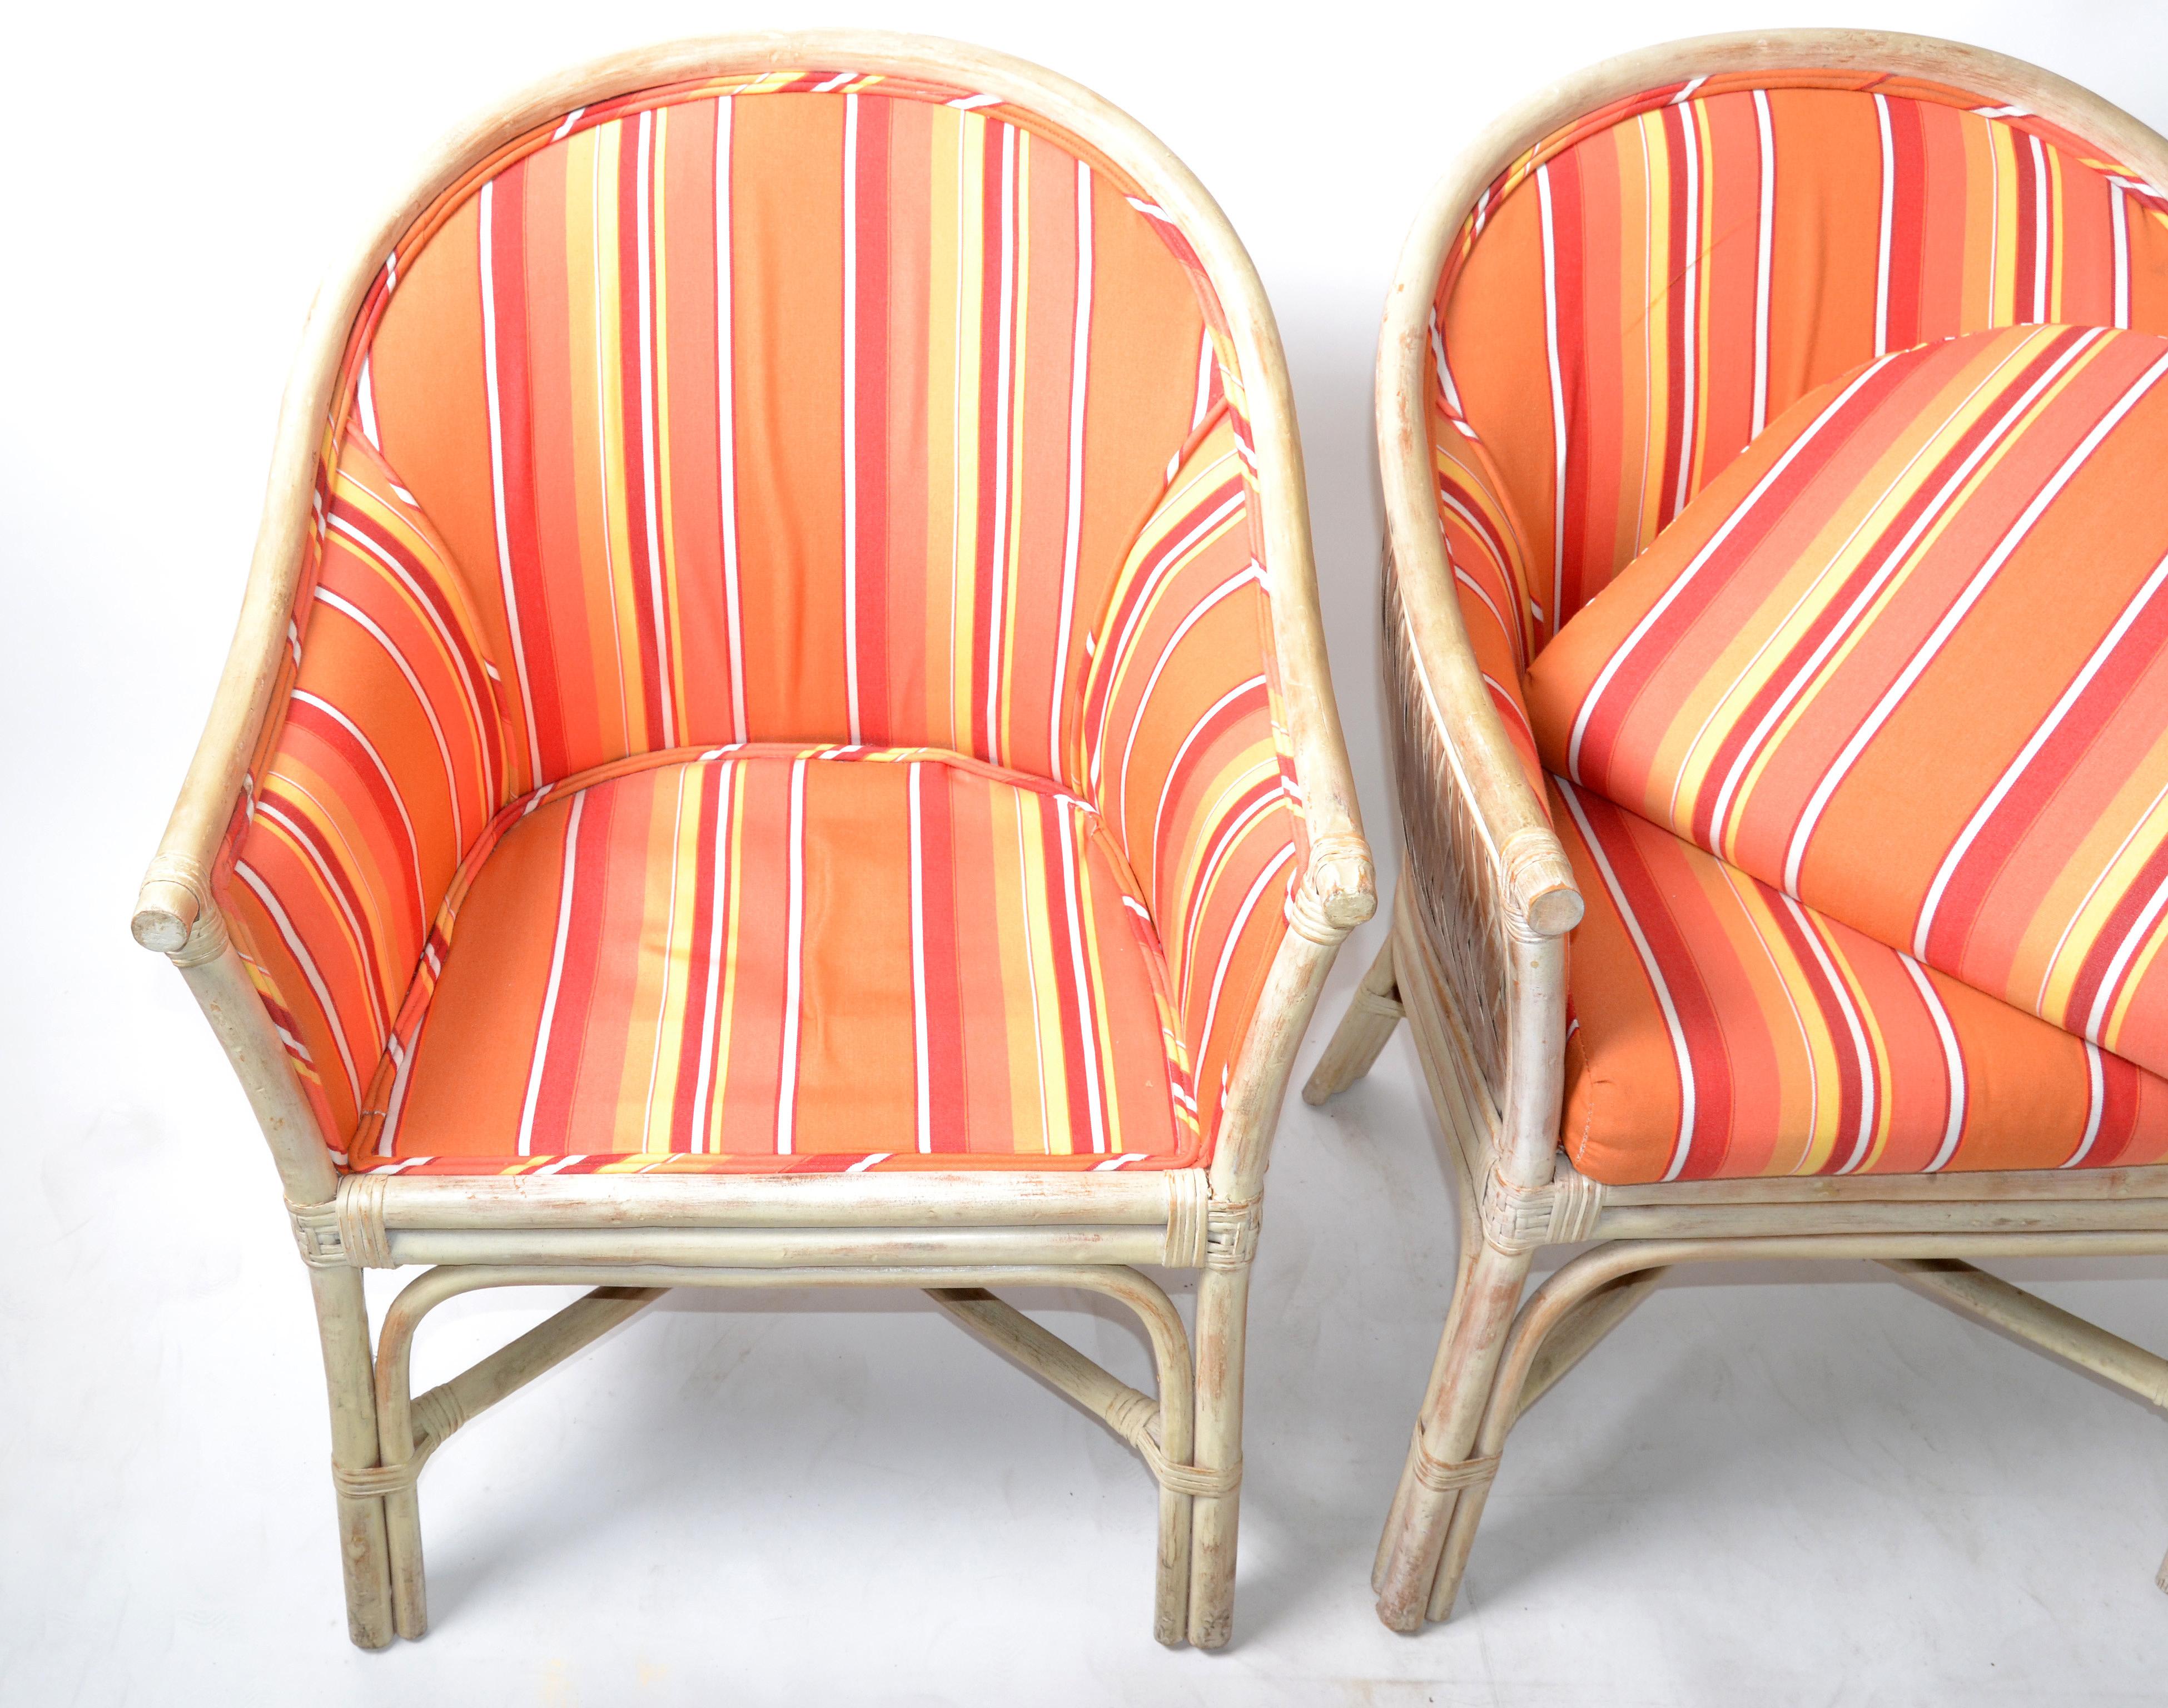 Pair, Mid-Century Modern Bamboo & Cane Armchair Orange Striped Upholstery, 1970 For Sale 6